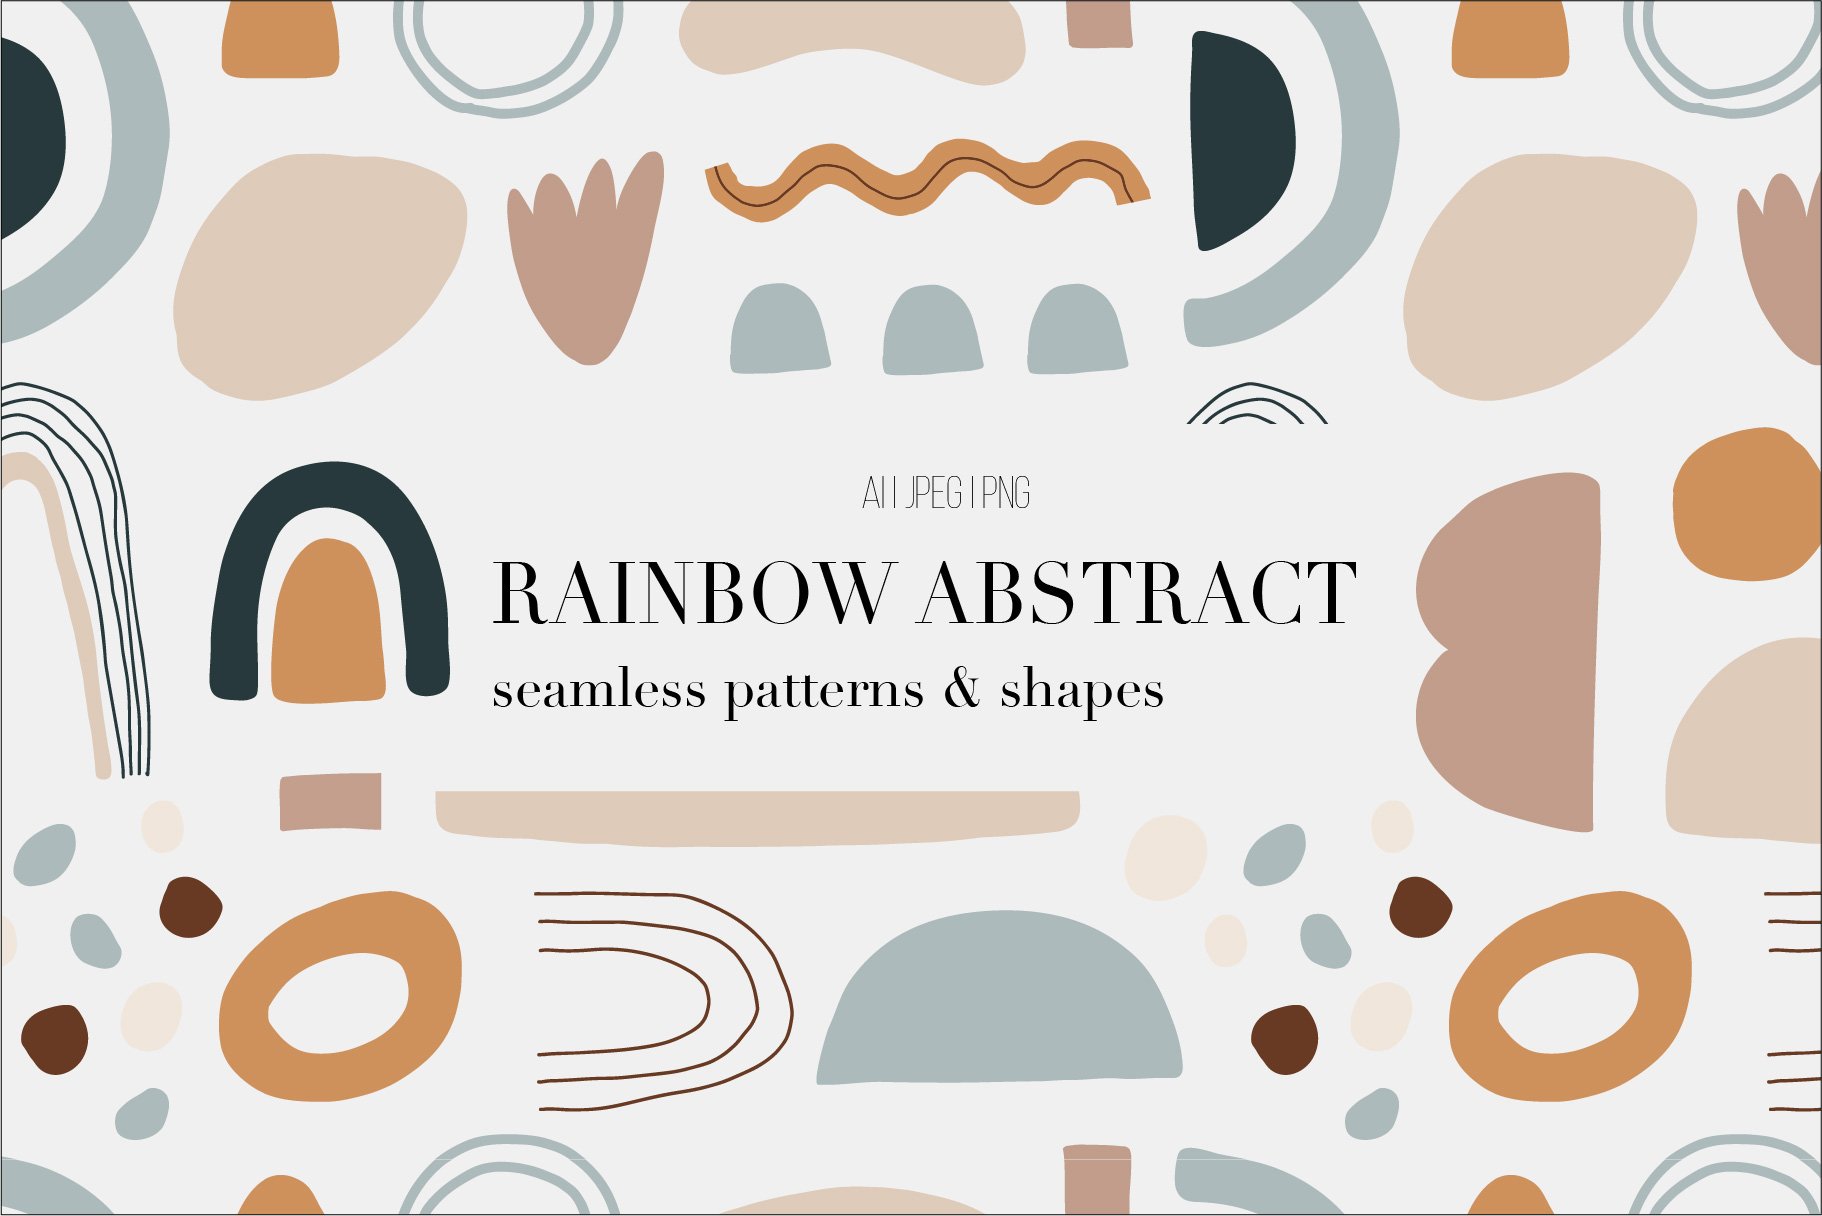 Rainbow Abstract Patterns & Shapes cover image.